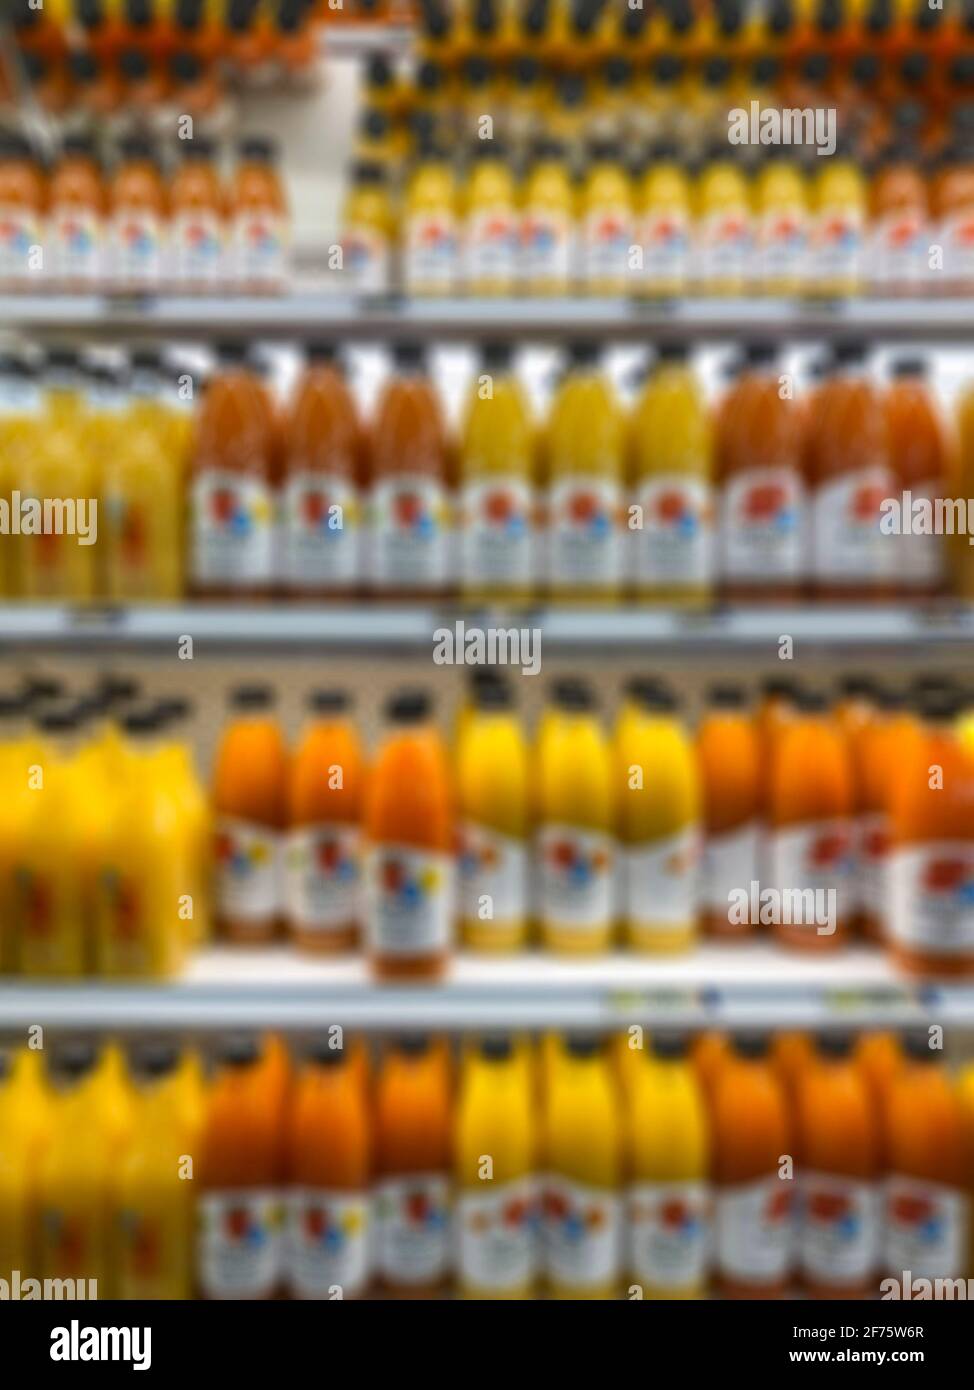 https://c8.alamy.com/comp/2F75W6R/blurred-background-with-row-of-juice-bottles-on-shelves-in-the-supermarket-2F75W6R.jpg